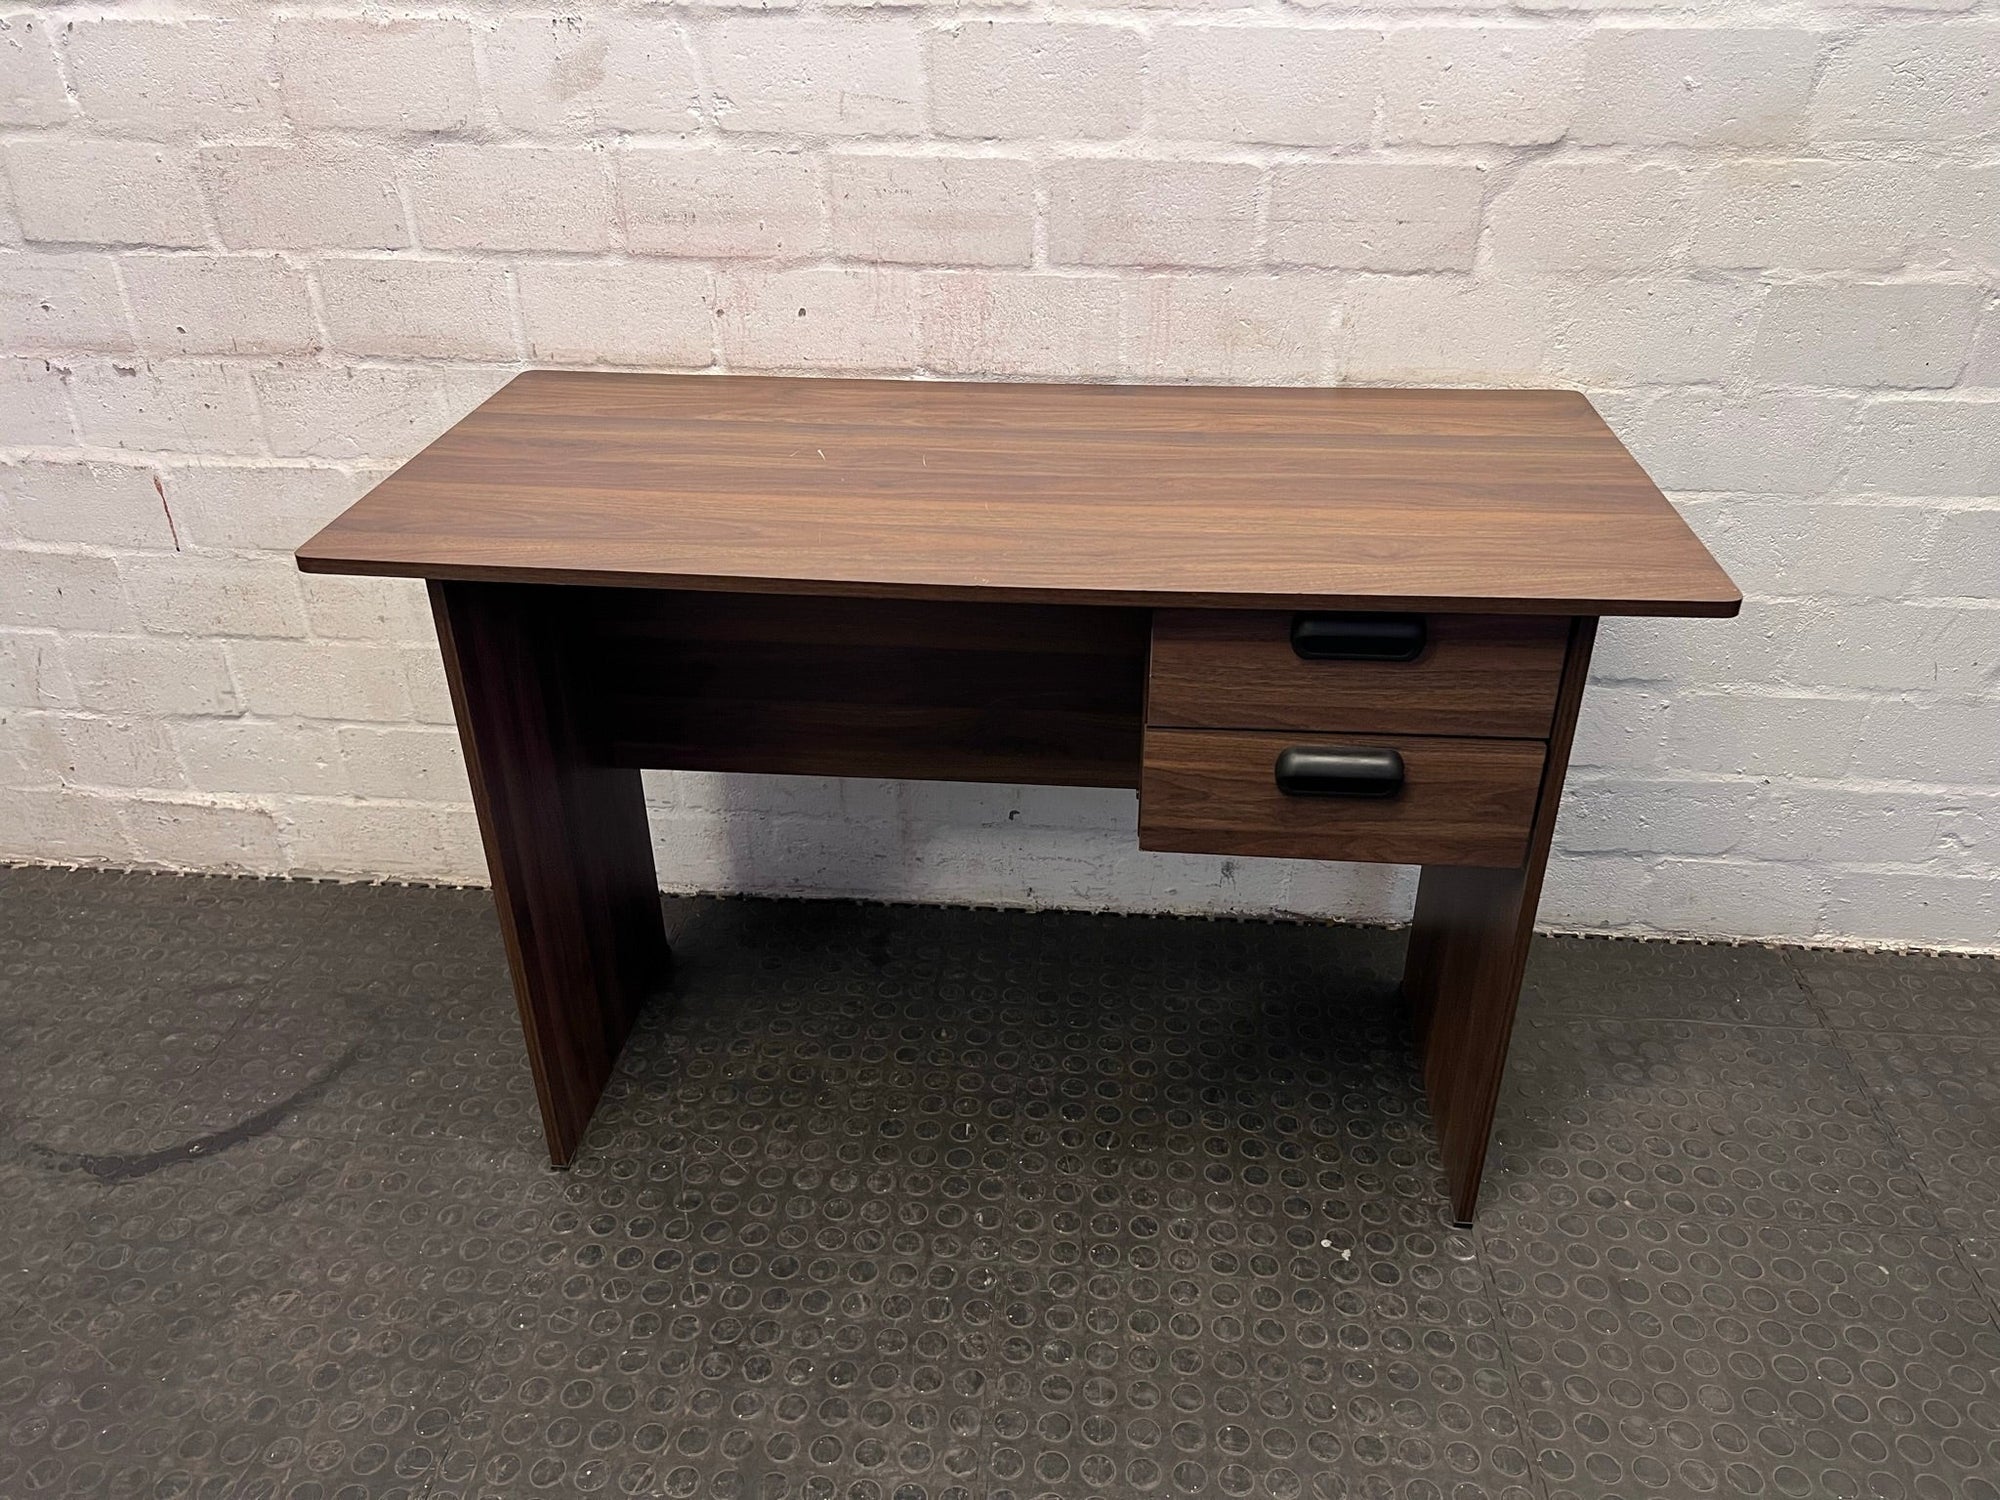 Brown Wood Print Two Drawer Office Desk